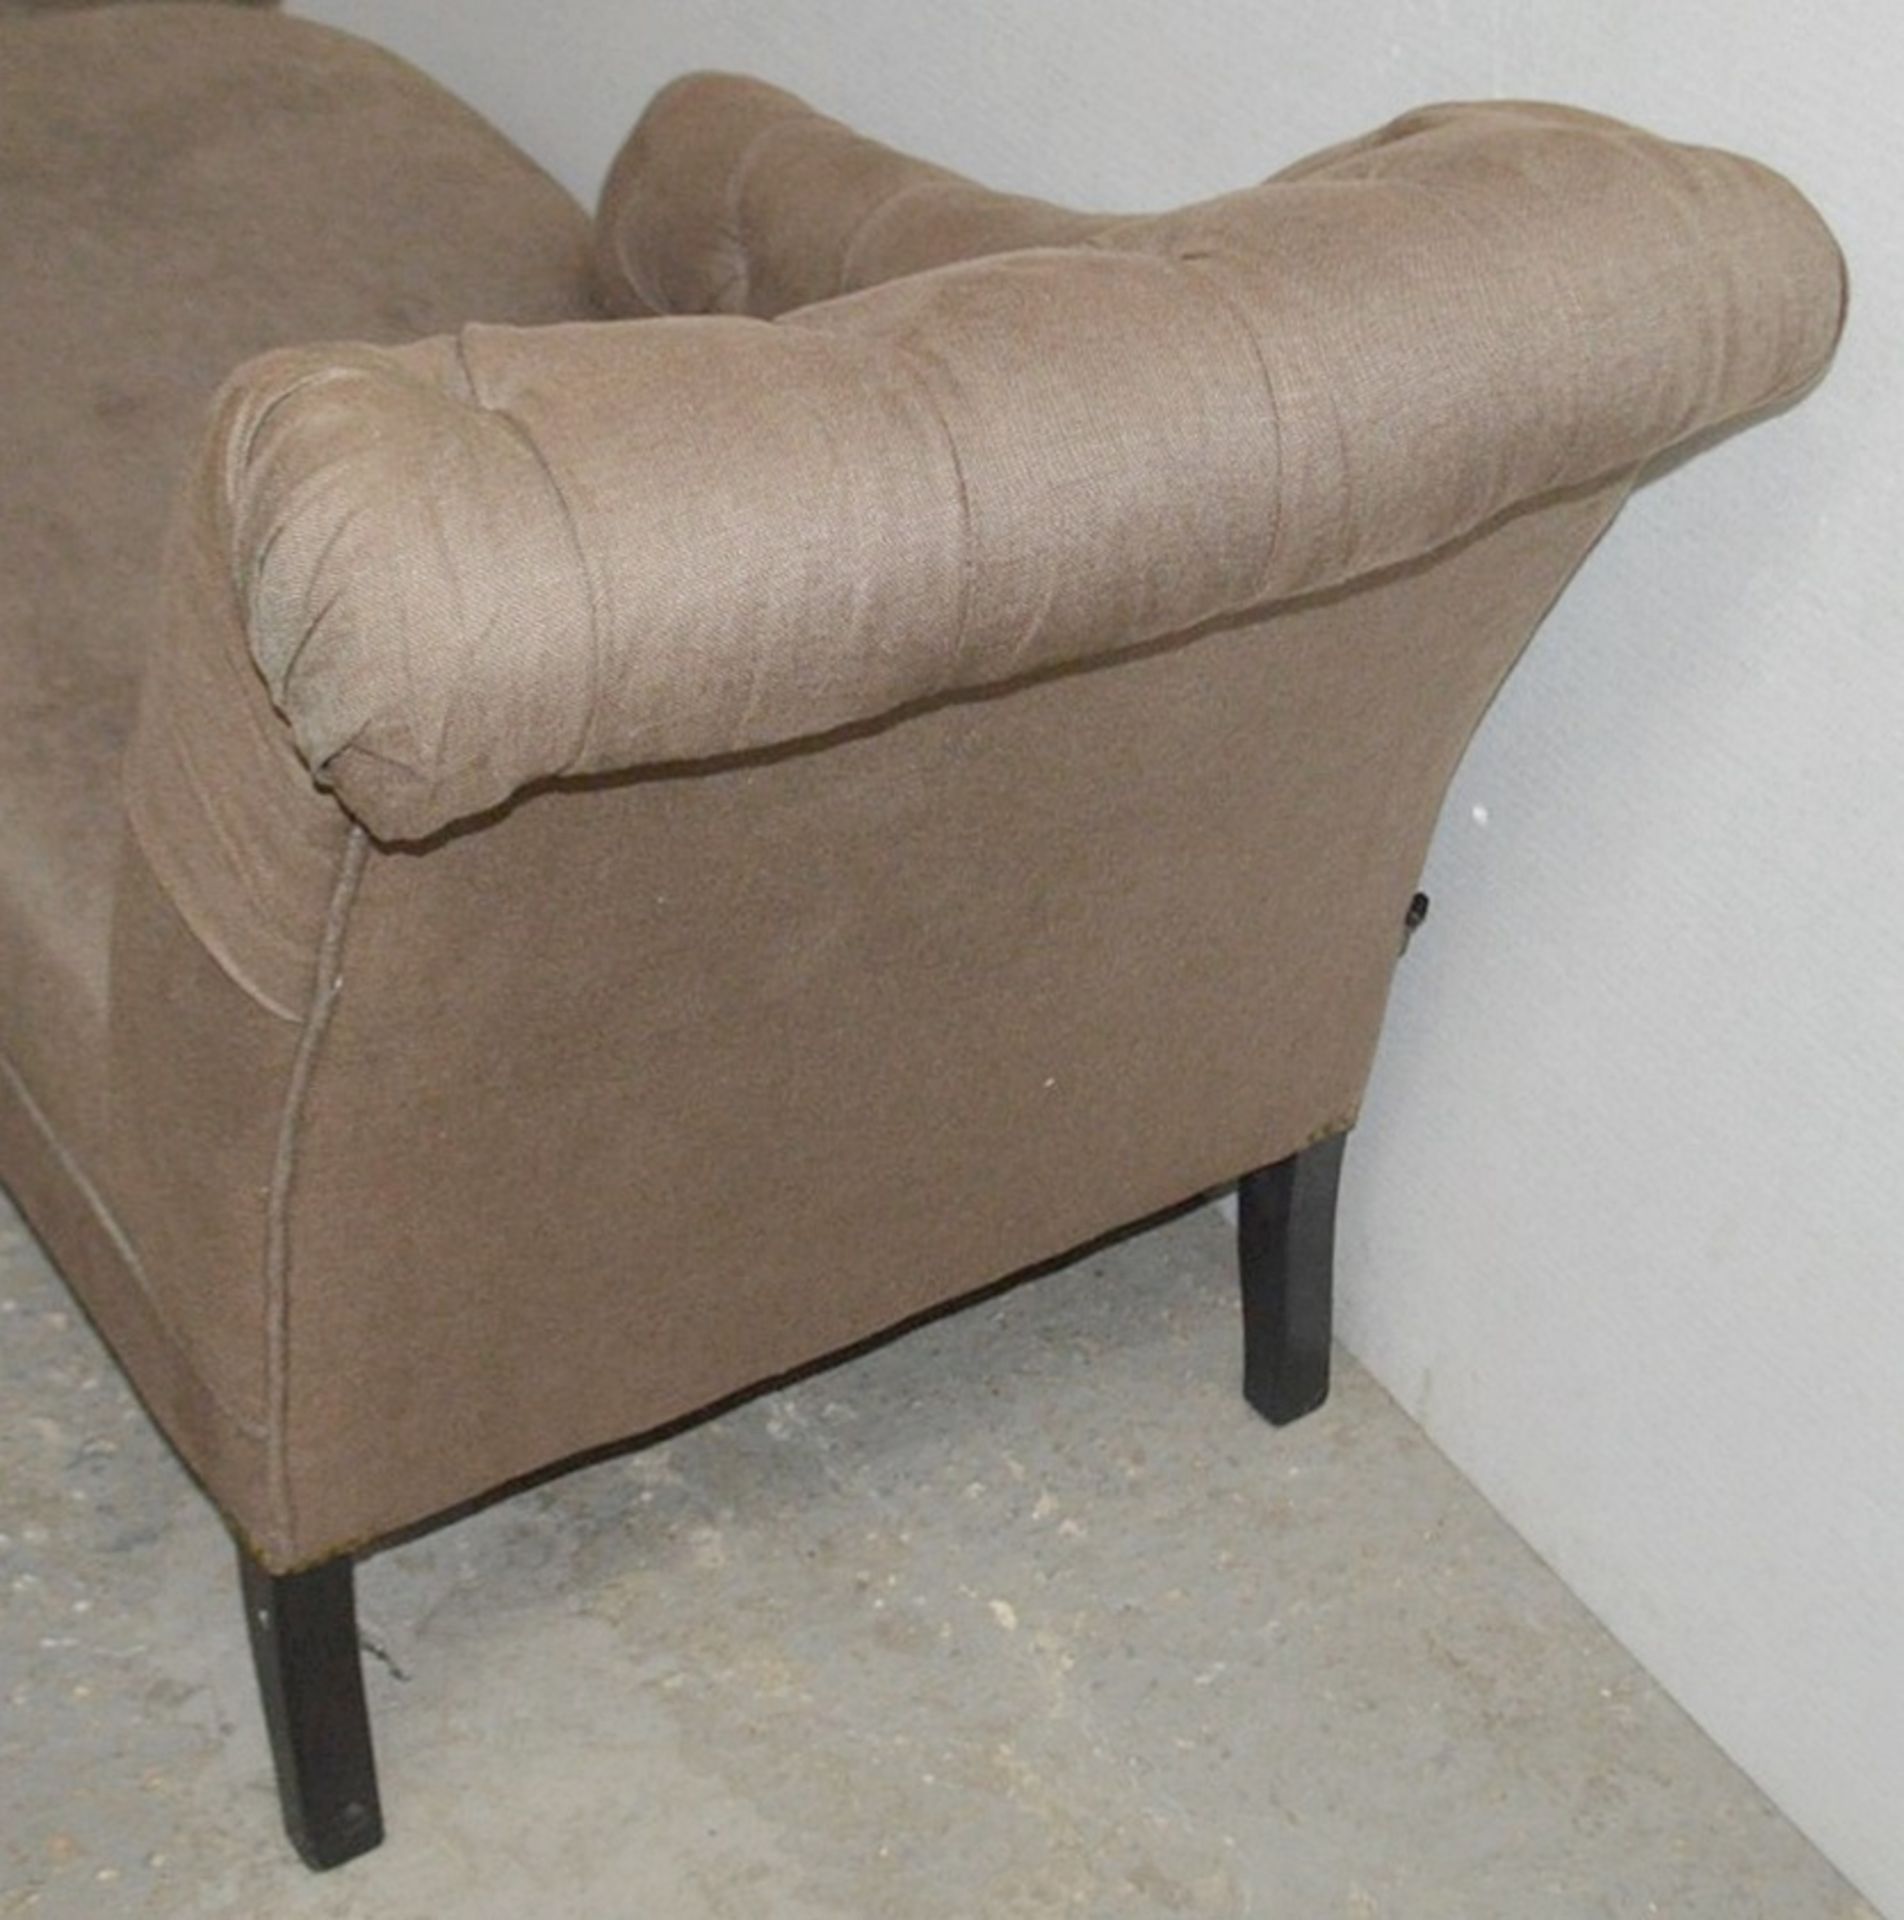 1 x EICHHOLTZ Button-Back Chaise Longue In Brown - Ex-Display Piece - Dimensions: H82 x W135 x D60cm - Image 4 of 4